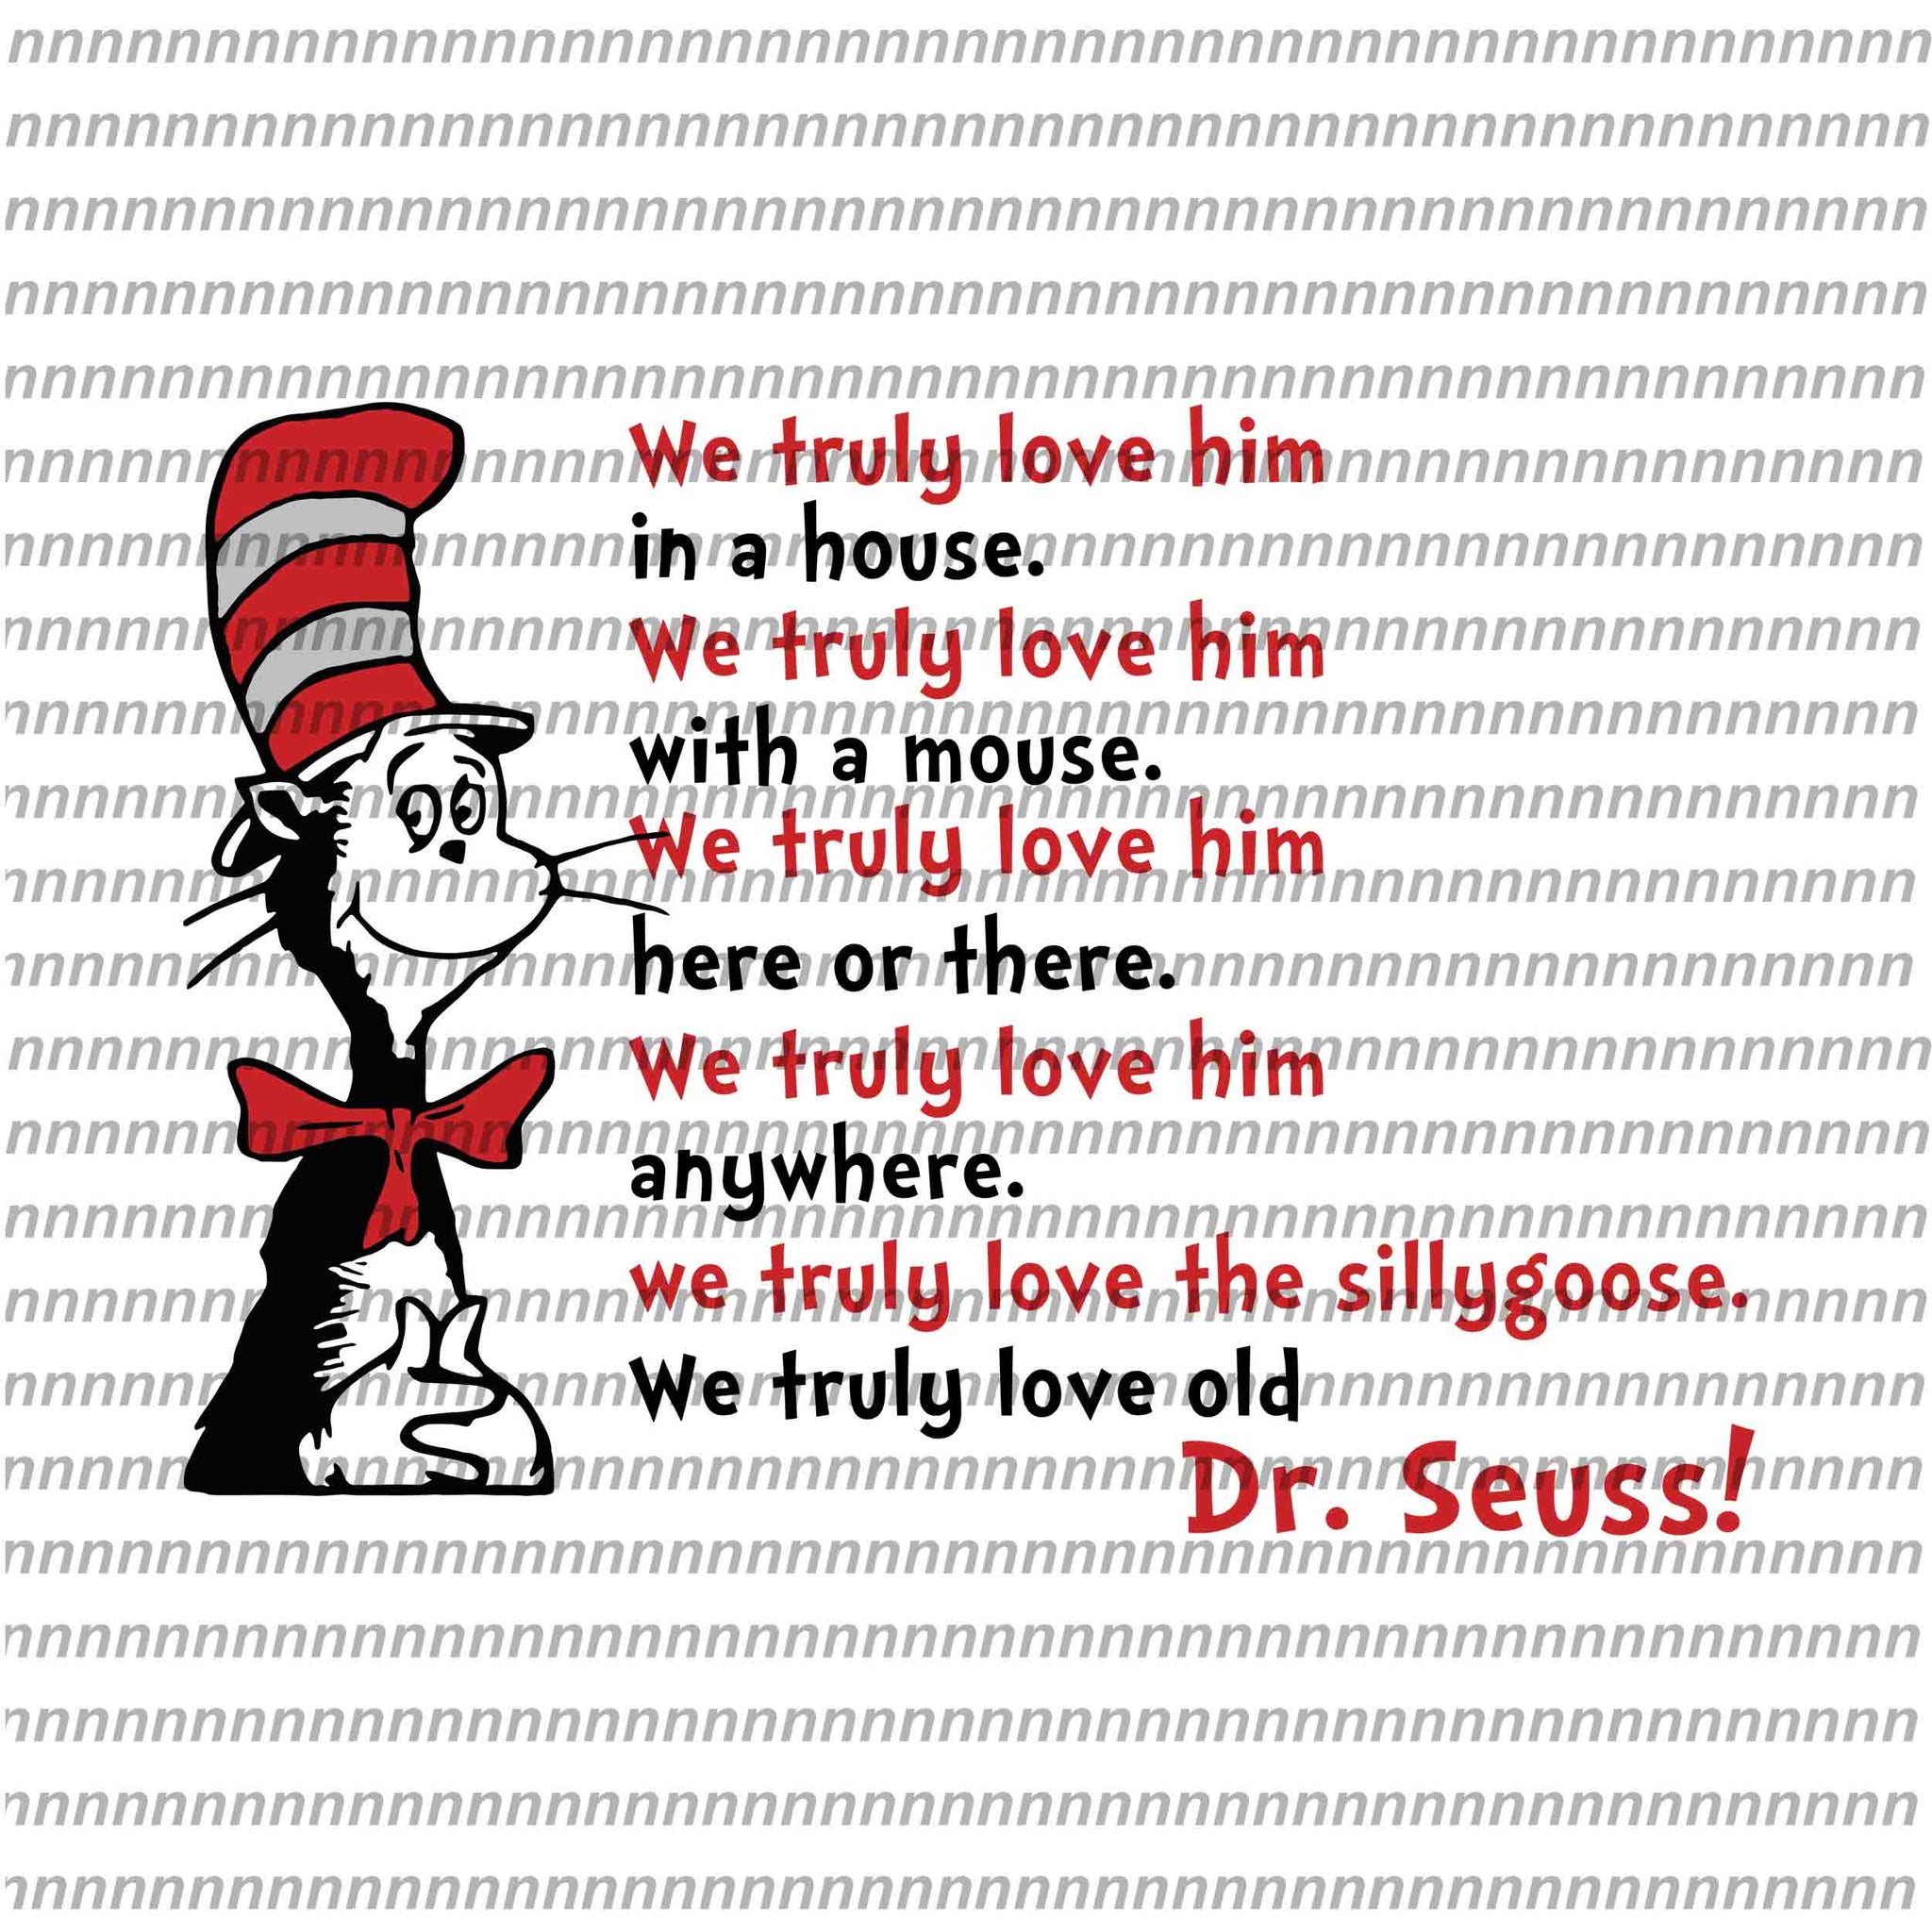 We truly love him in a house, dr seuss svg, dr seuss quote, dr seuss design, Cat in the hat svg, thing 1 thing 2 thing 3, svg, png, dxf, eps file